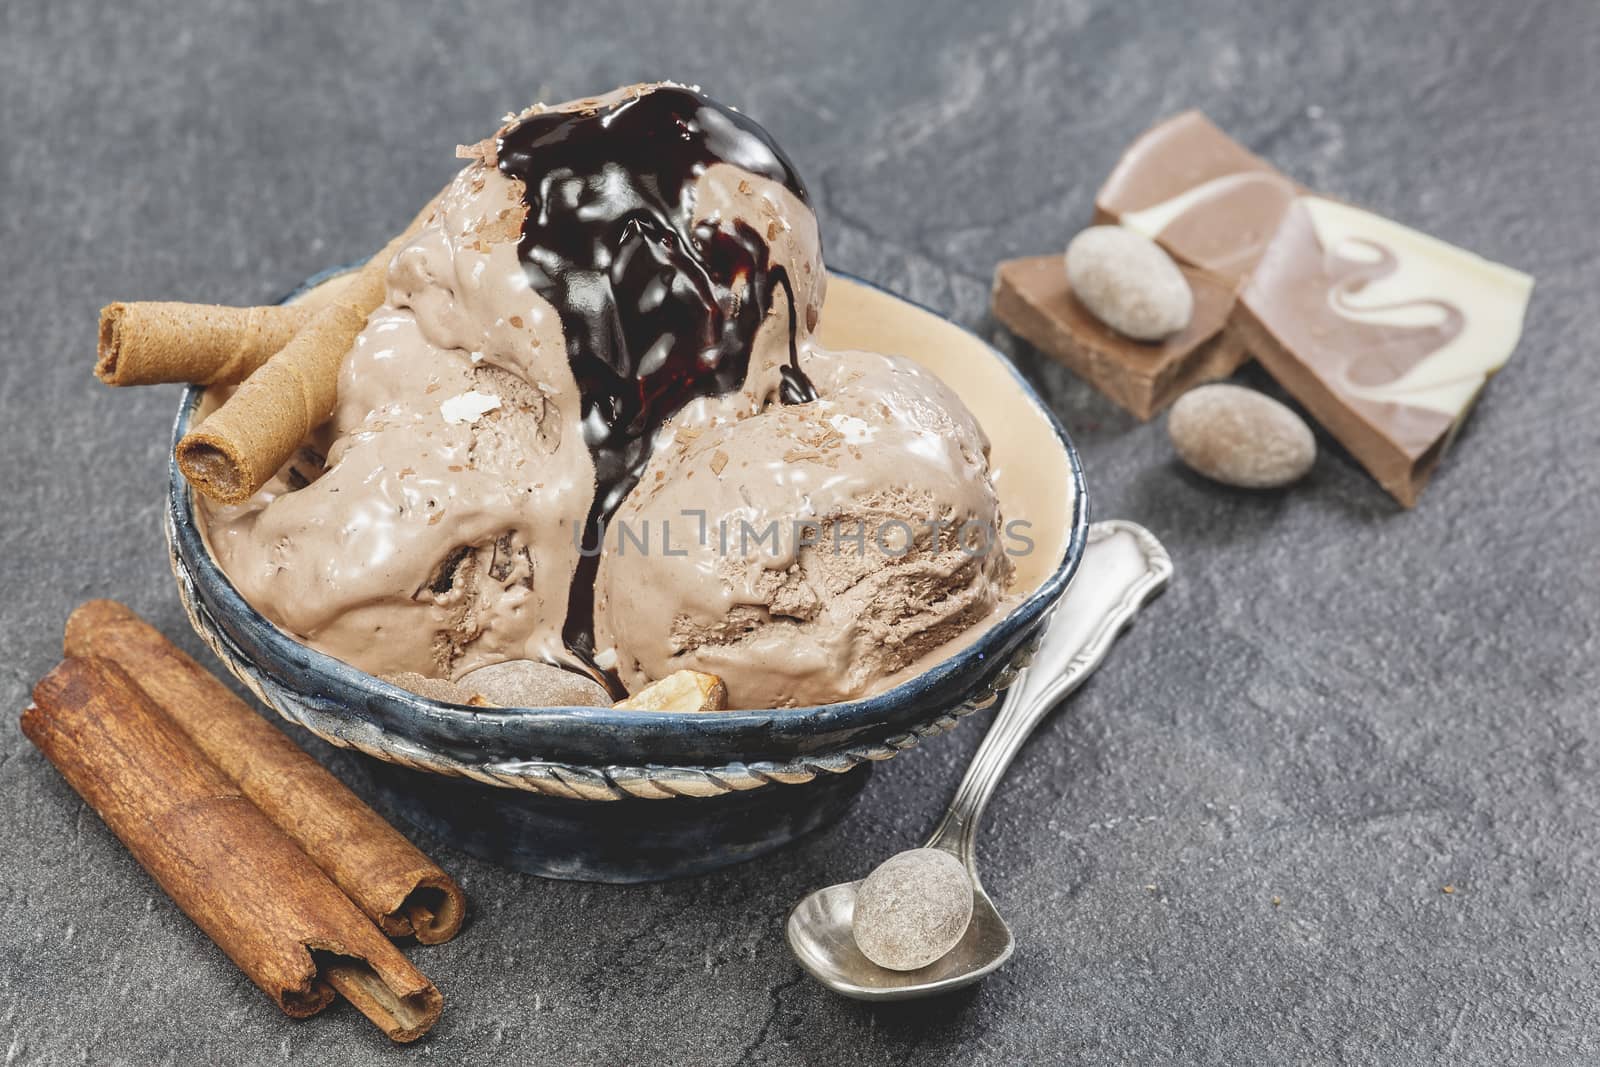 Chocolate ice cream scoops with chocolate topping, nuts and cinnamon on dark granite table. Macro photograph with shallow depth of field.